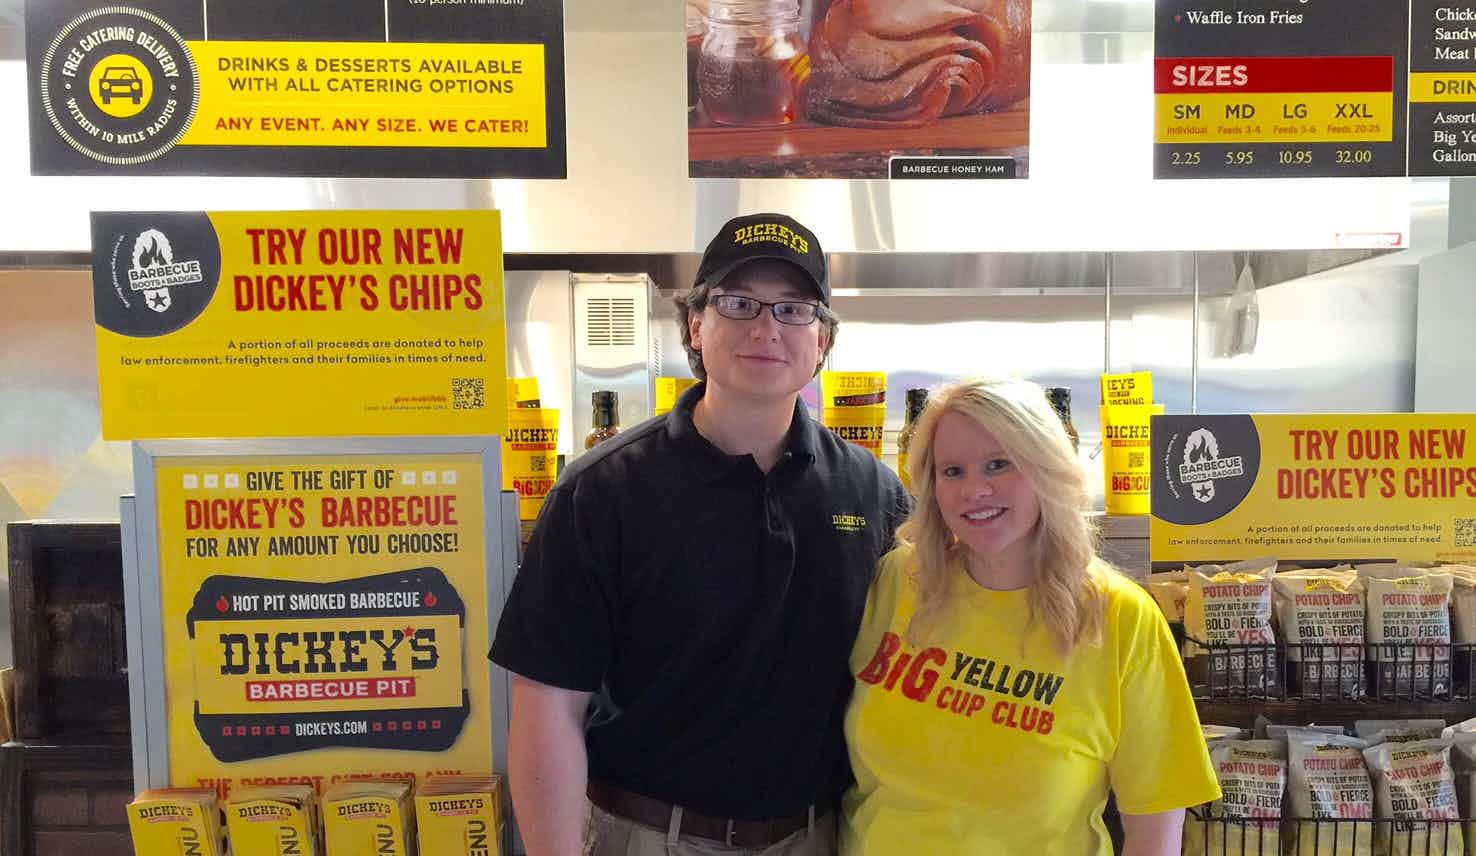 Dickey’s Barbecue Pit Brings Texas-style Barbecue to Tennessee